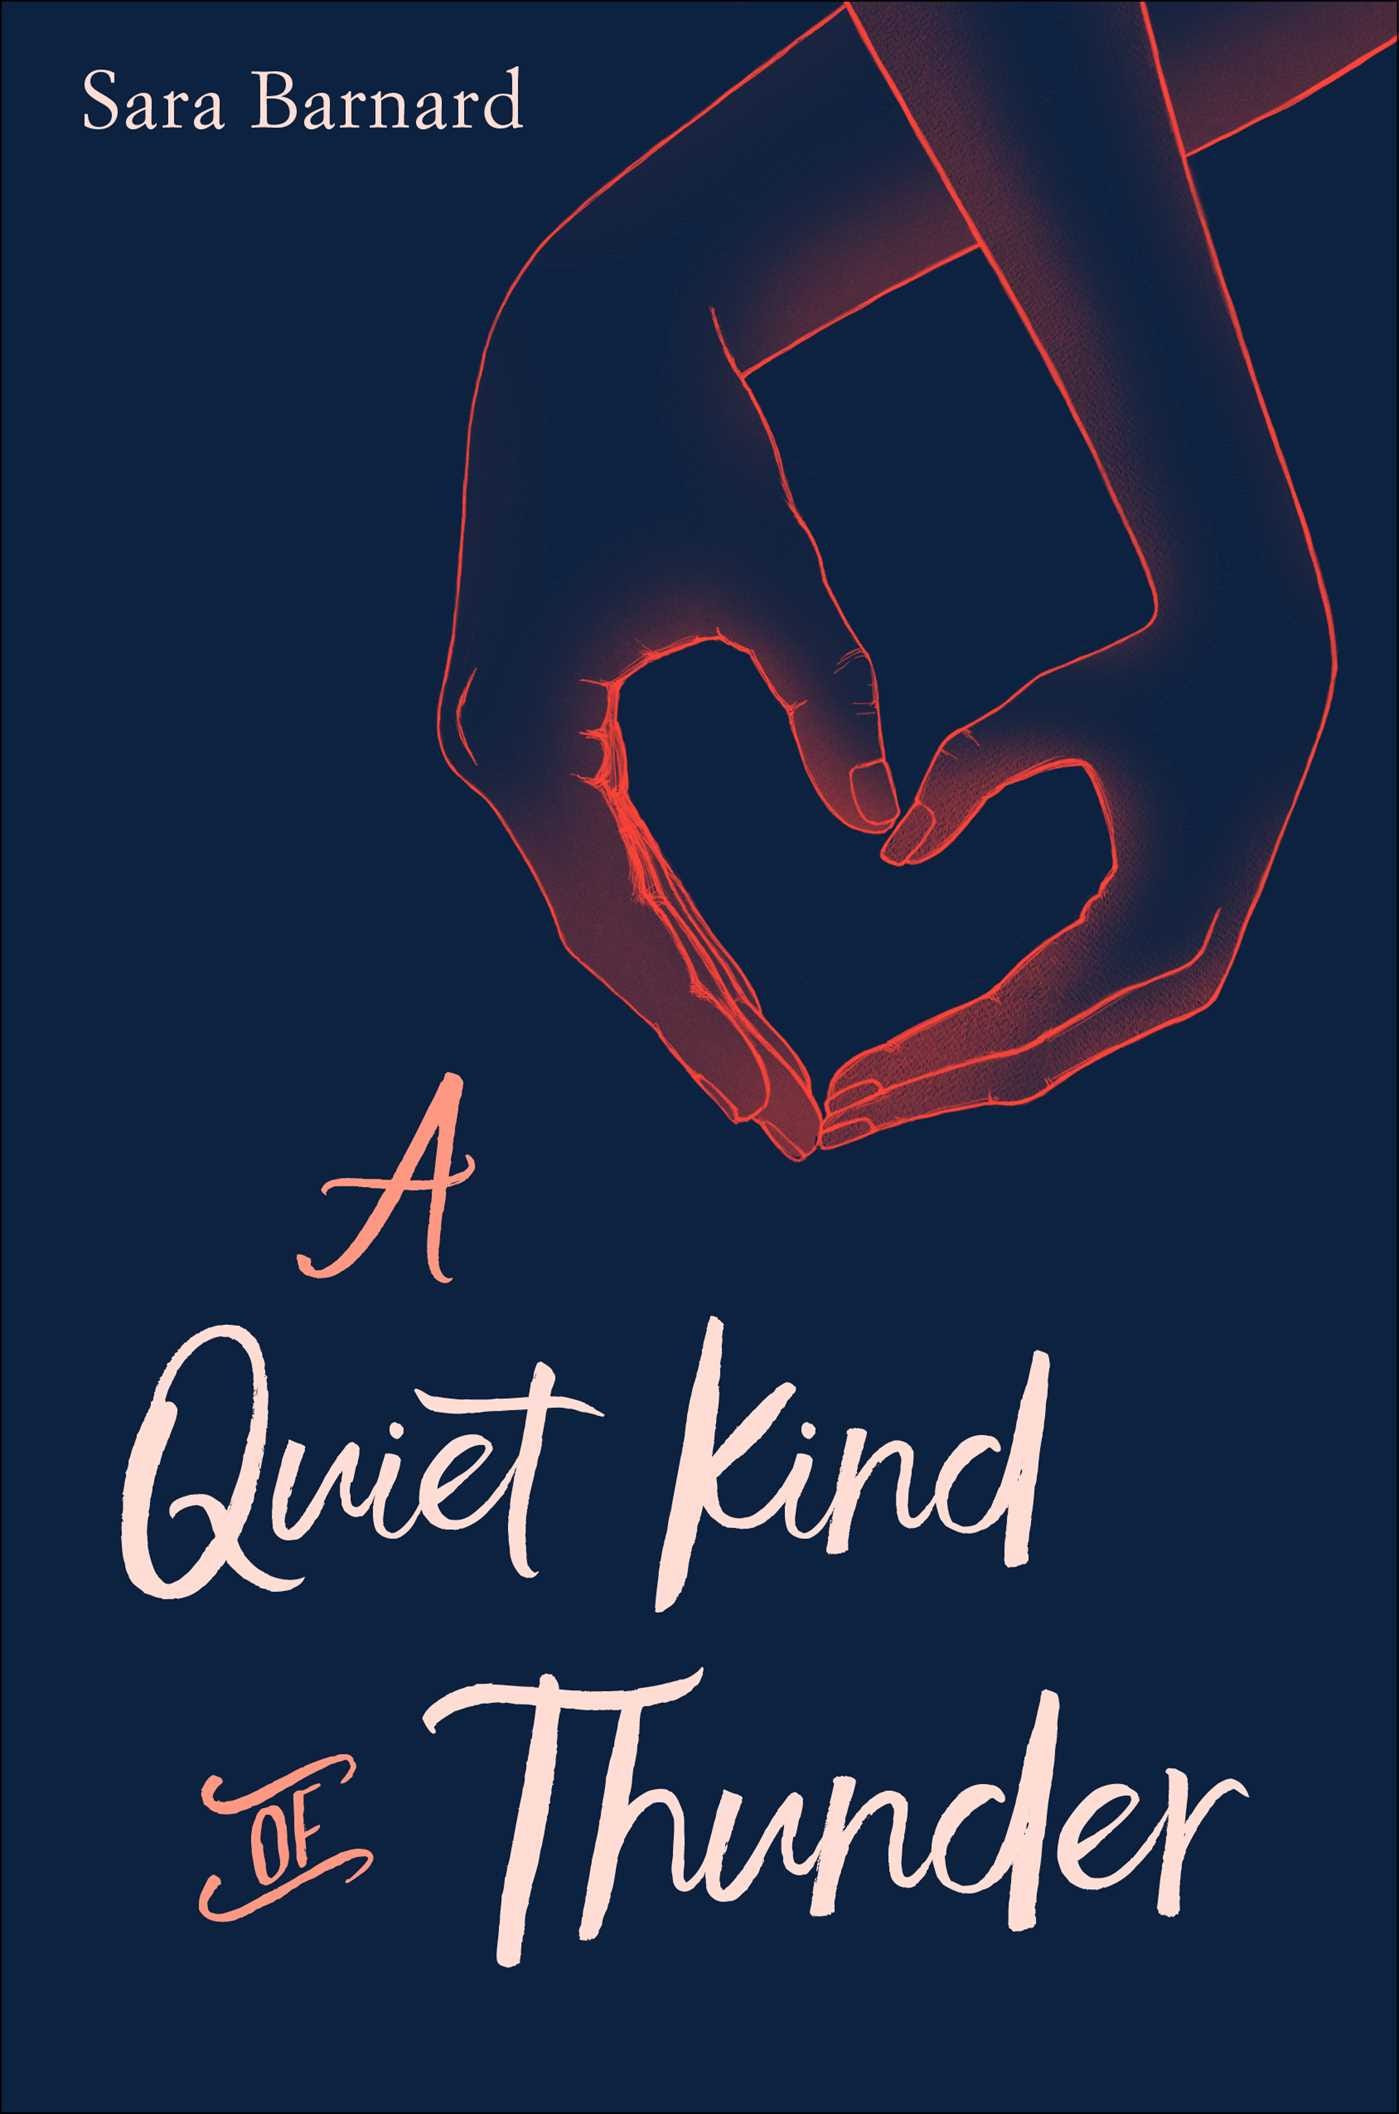 Cover of A Quiet Kind of Thunder by Sara Barnard